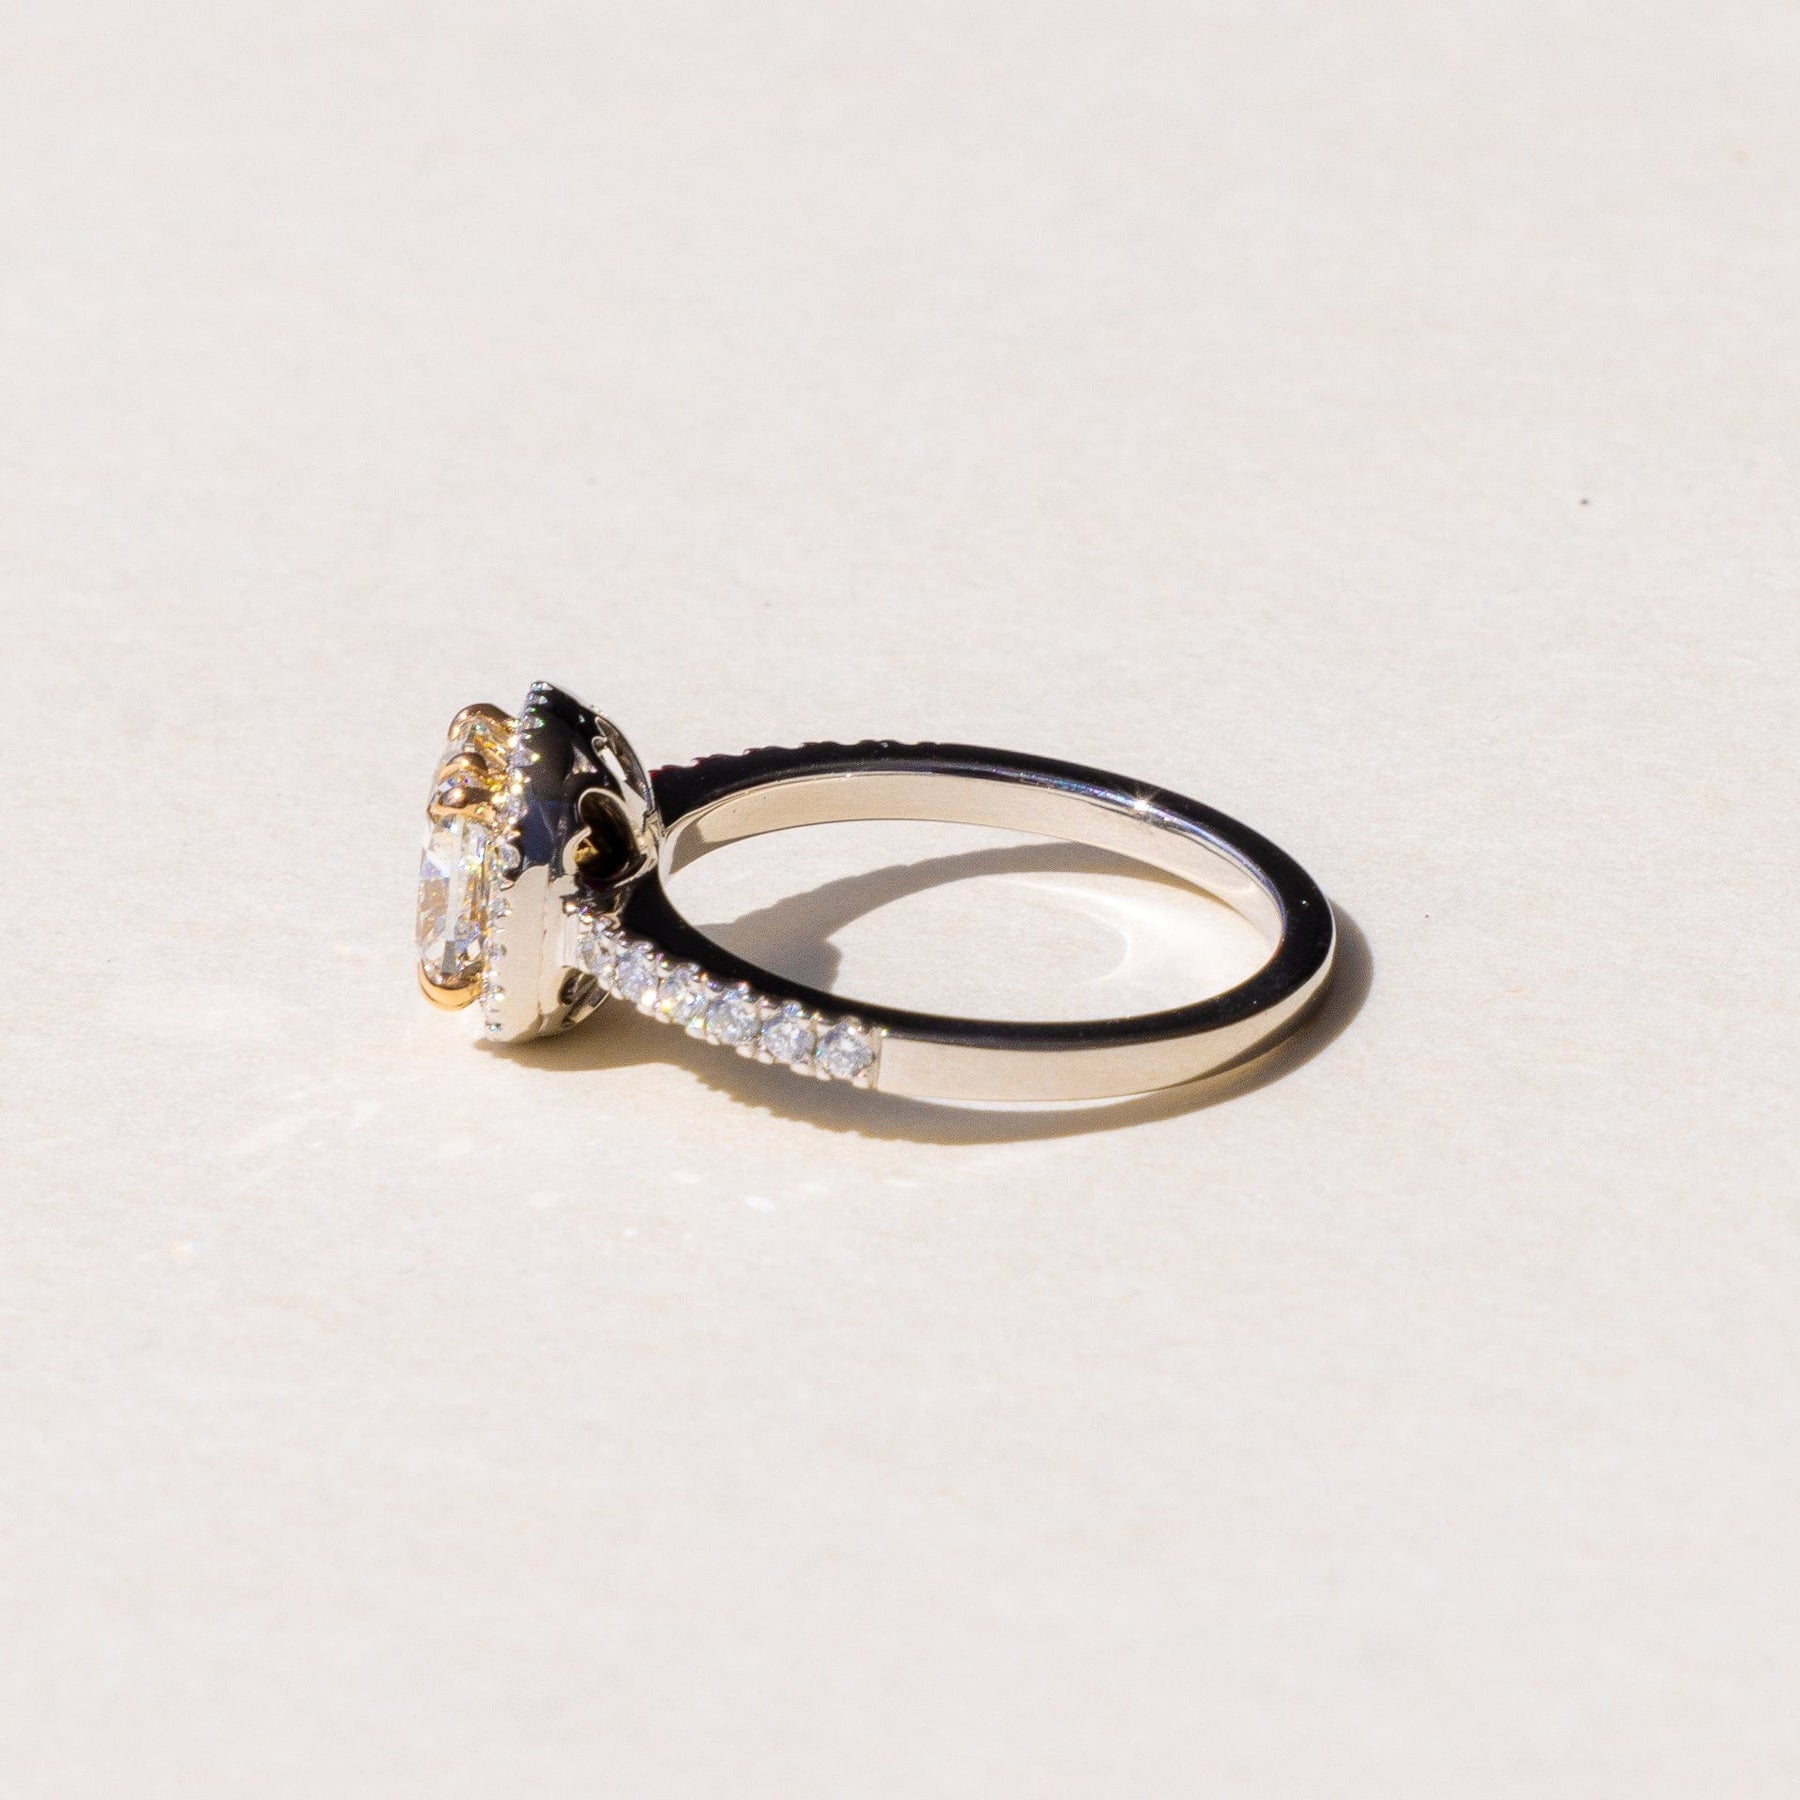 
Bespoke Diamond solitaire handcrafted in our Auckland showroom
